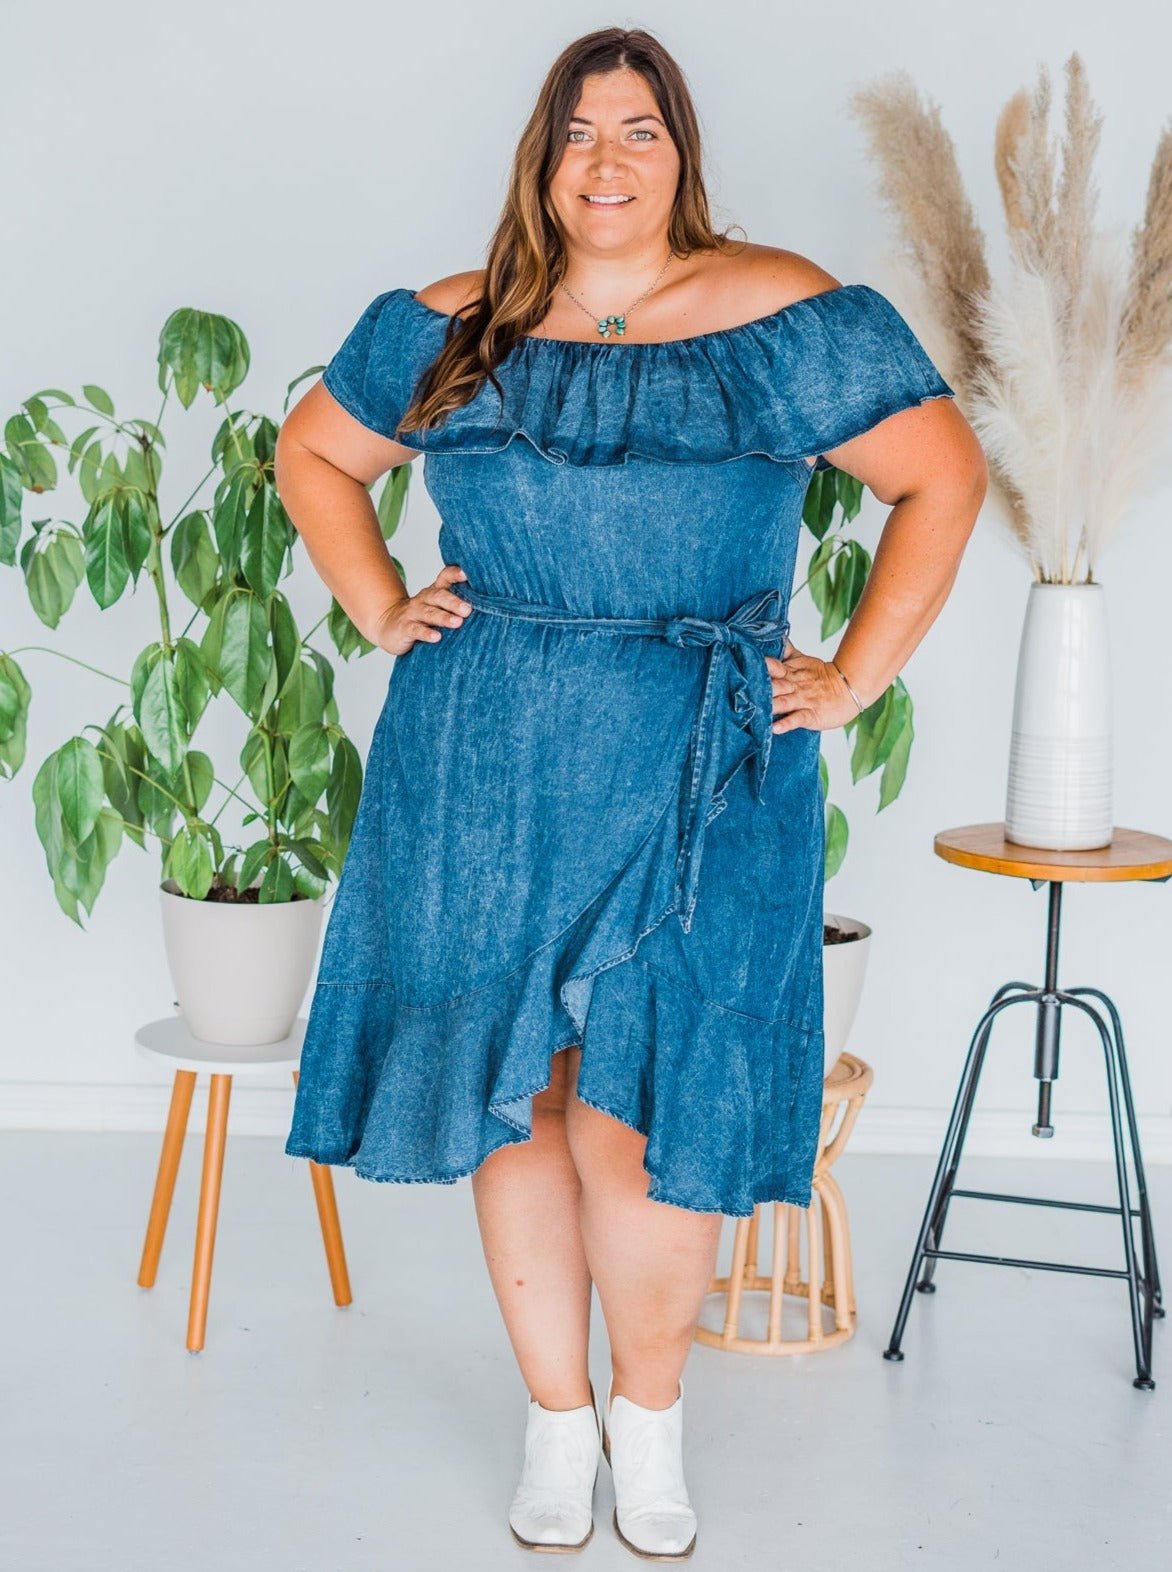 Plus Size Summer Denim Denim Dress For Women Sleeveless, Knee Length, Blue  Midi Skirt In 3X, 4XL, And 5XL Sizes With DHL Shipping 5428 From  Sell_clothing, $20 | DHgate.Com